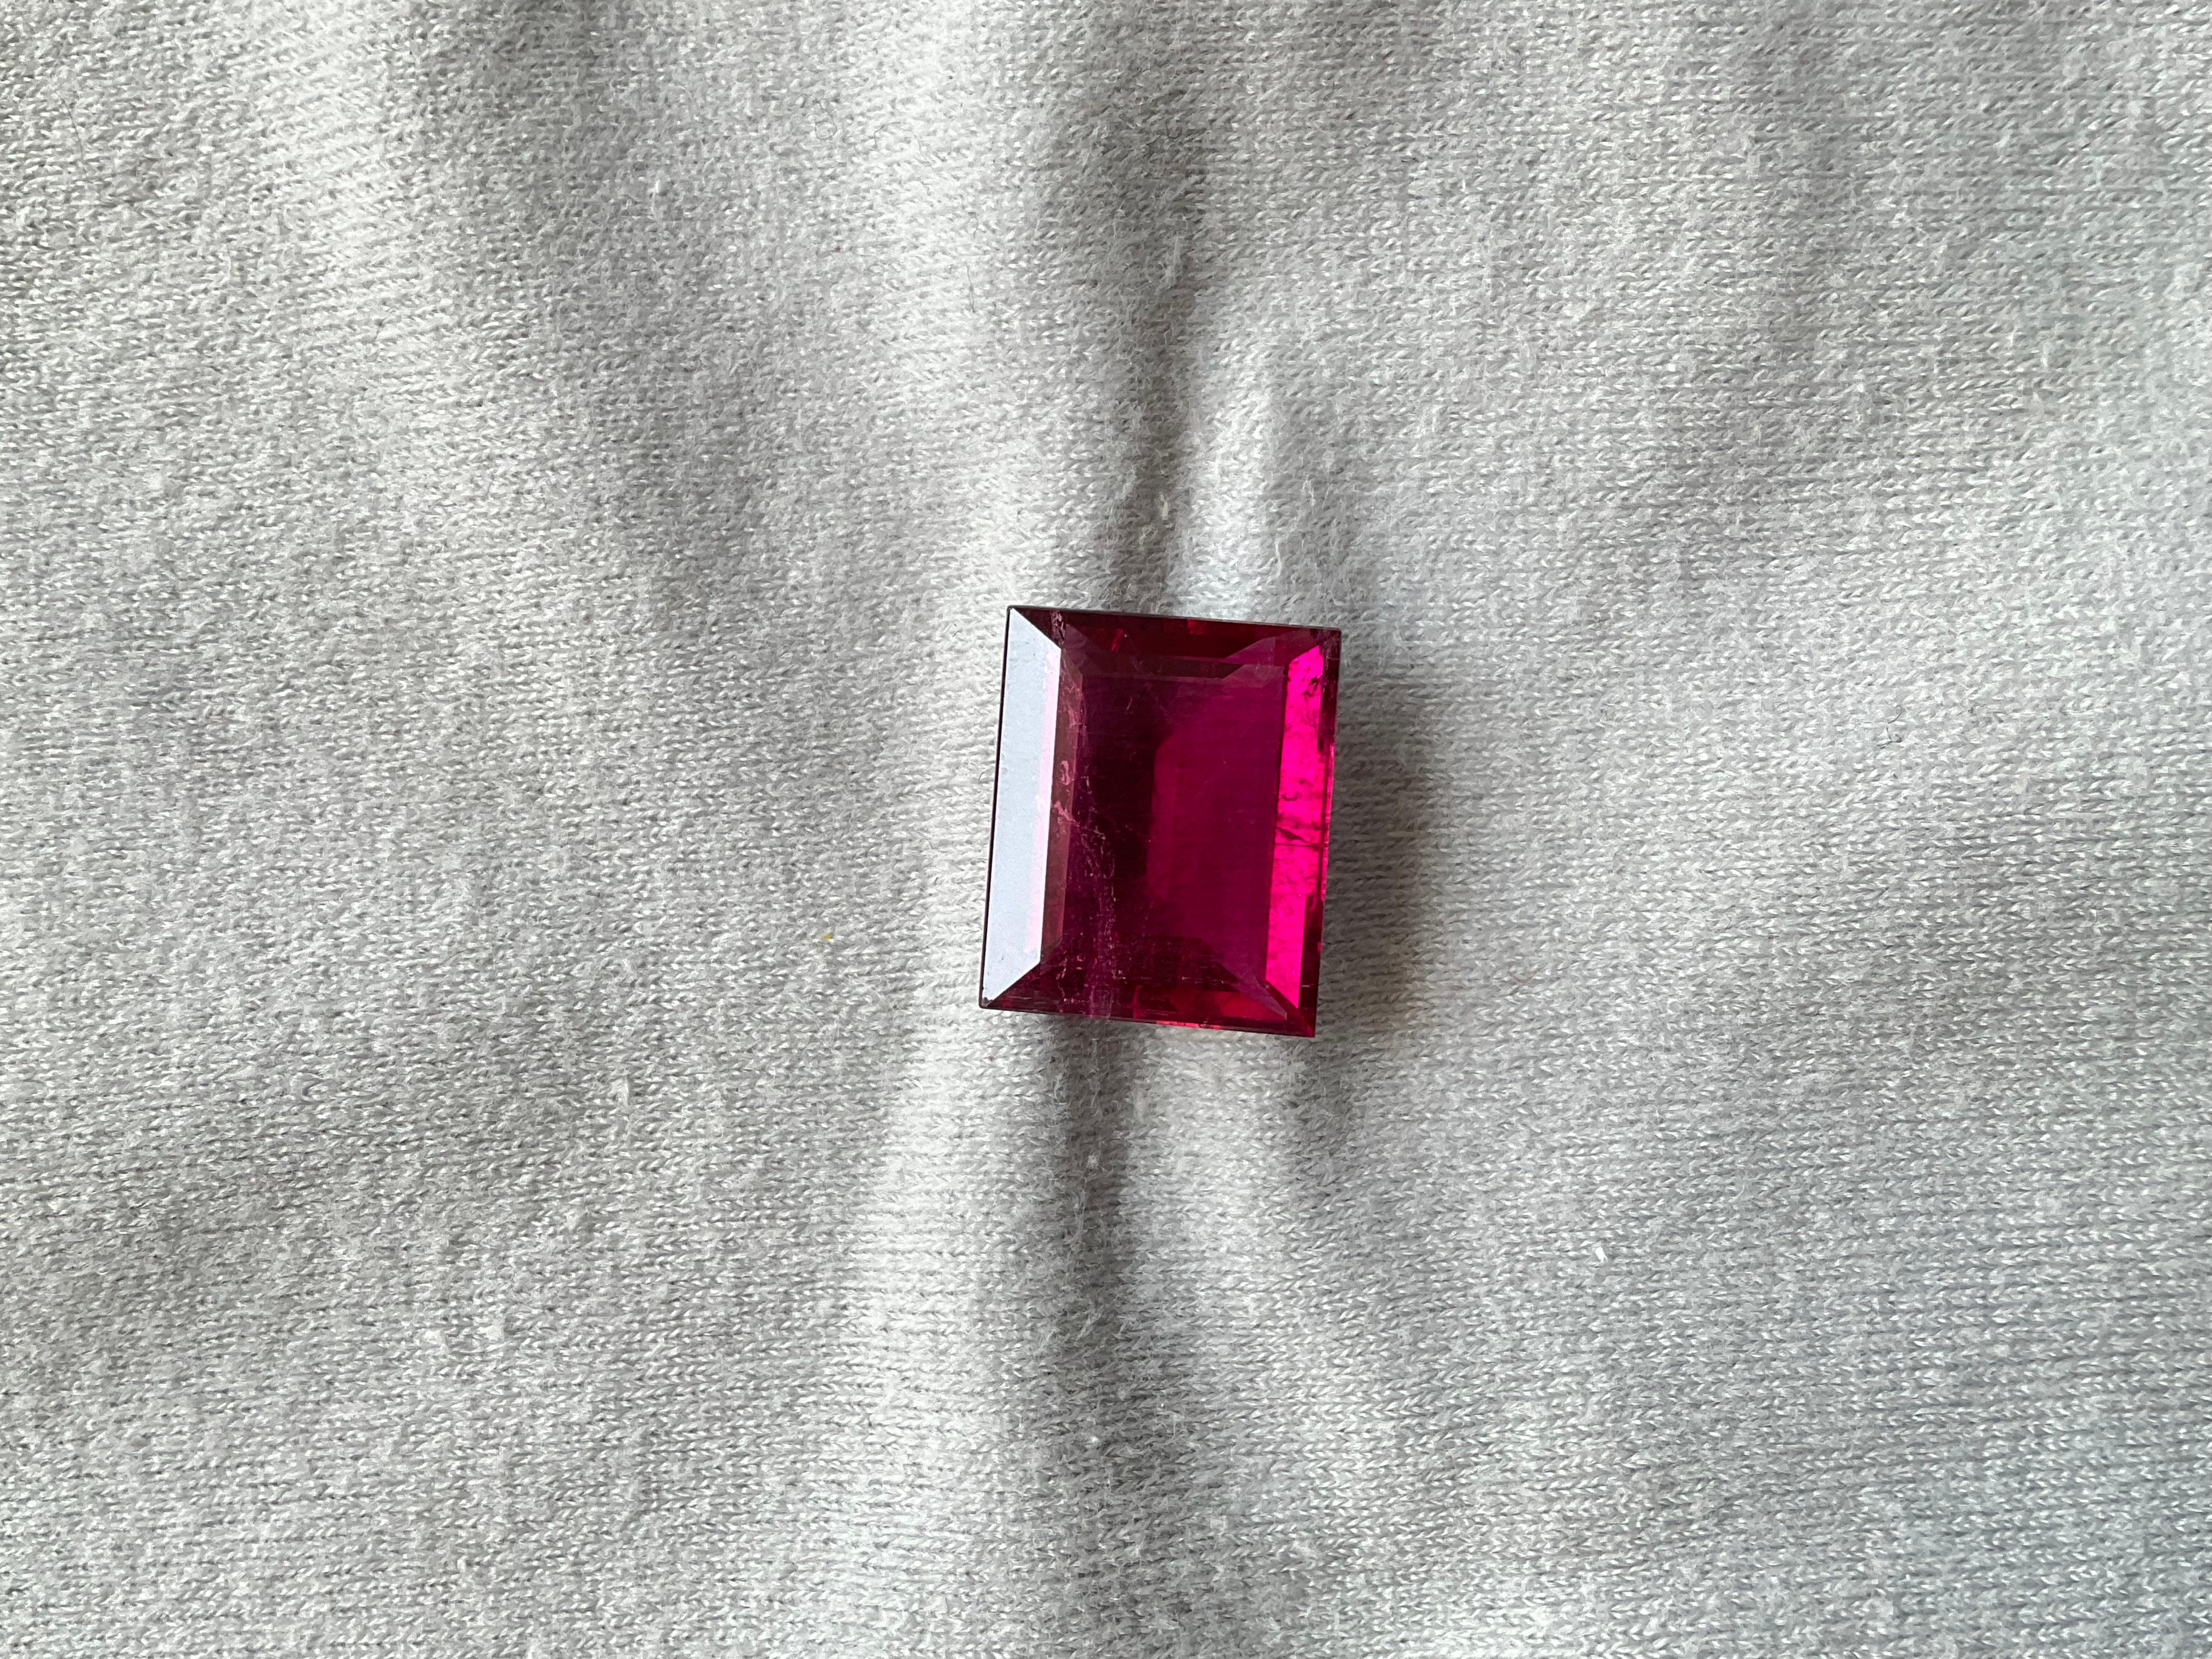 14.70 Carats Rubellite Tourmaline Octagon Cut Stone For Fine Jewelry Natural gem For Sale 1